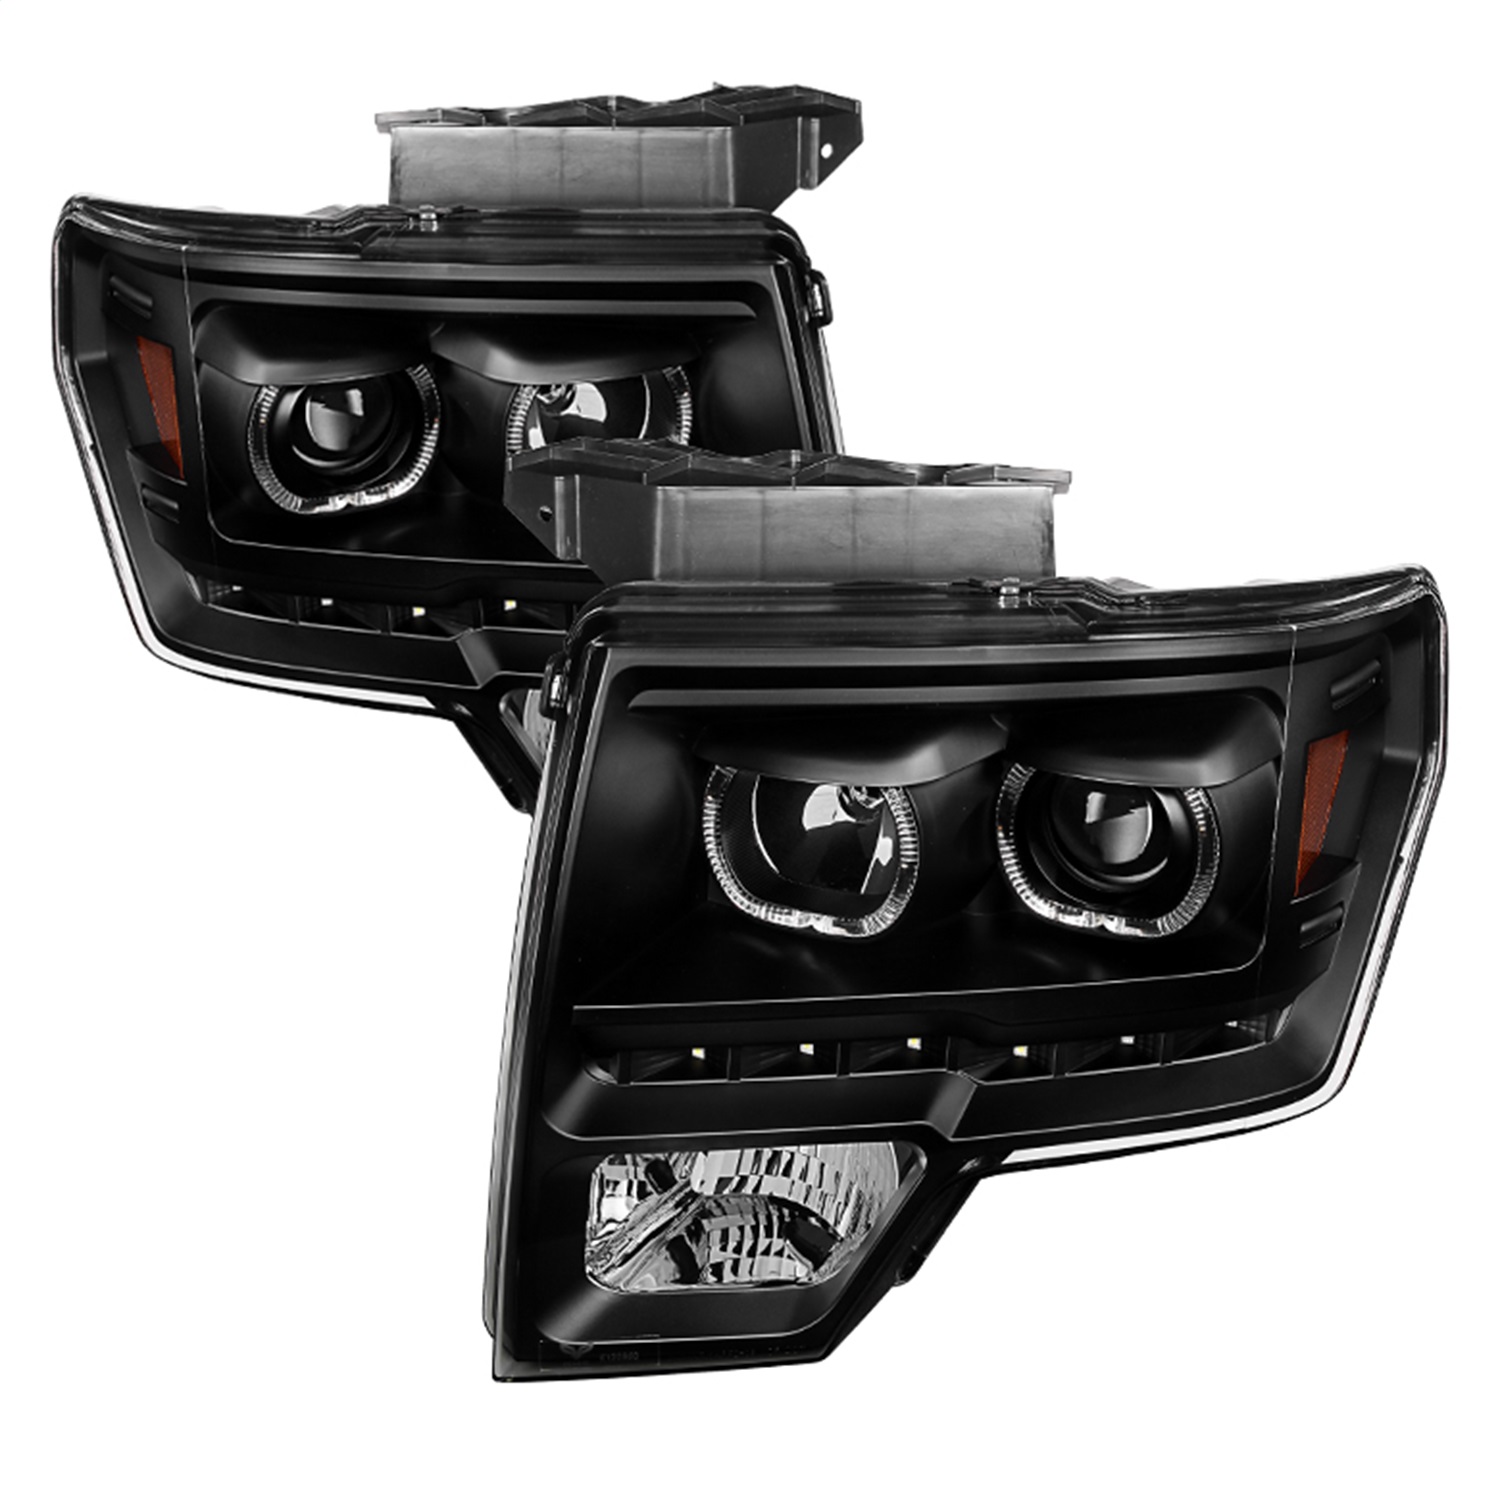 Spyder Auto 9032226 XTune Halo Projector Headlights Fits 09-14 F-150